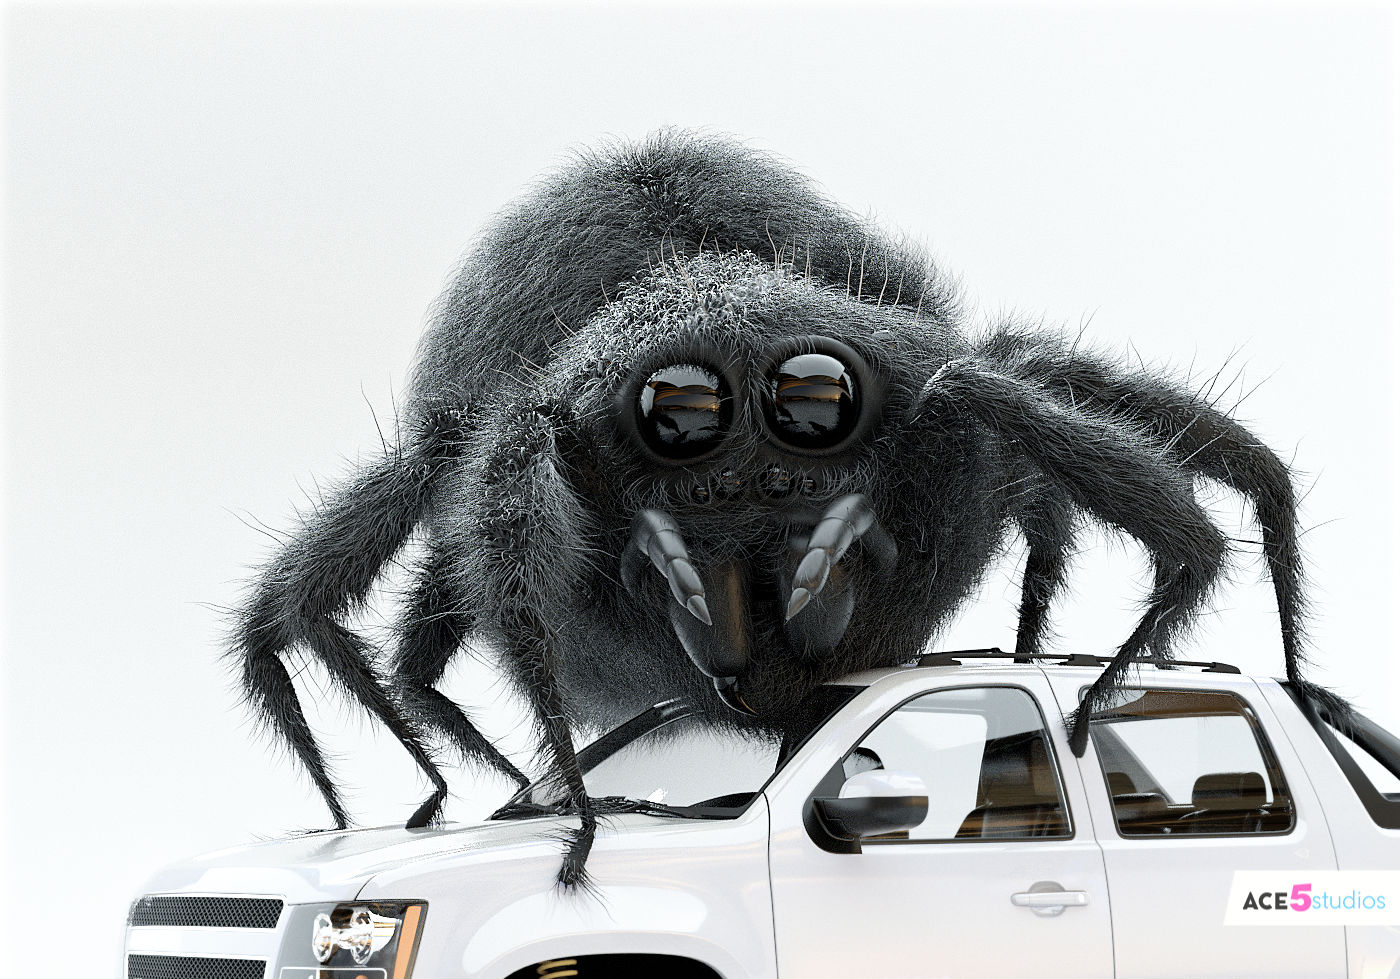 rigged spider cinema 4d sitting on a chevy car